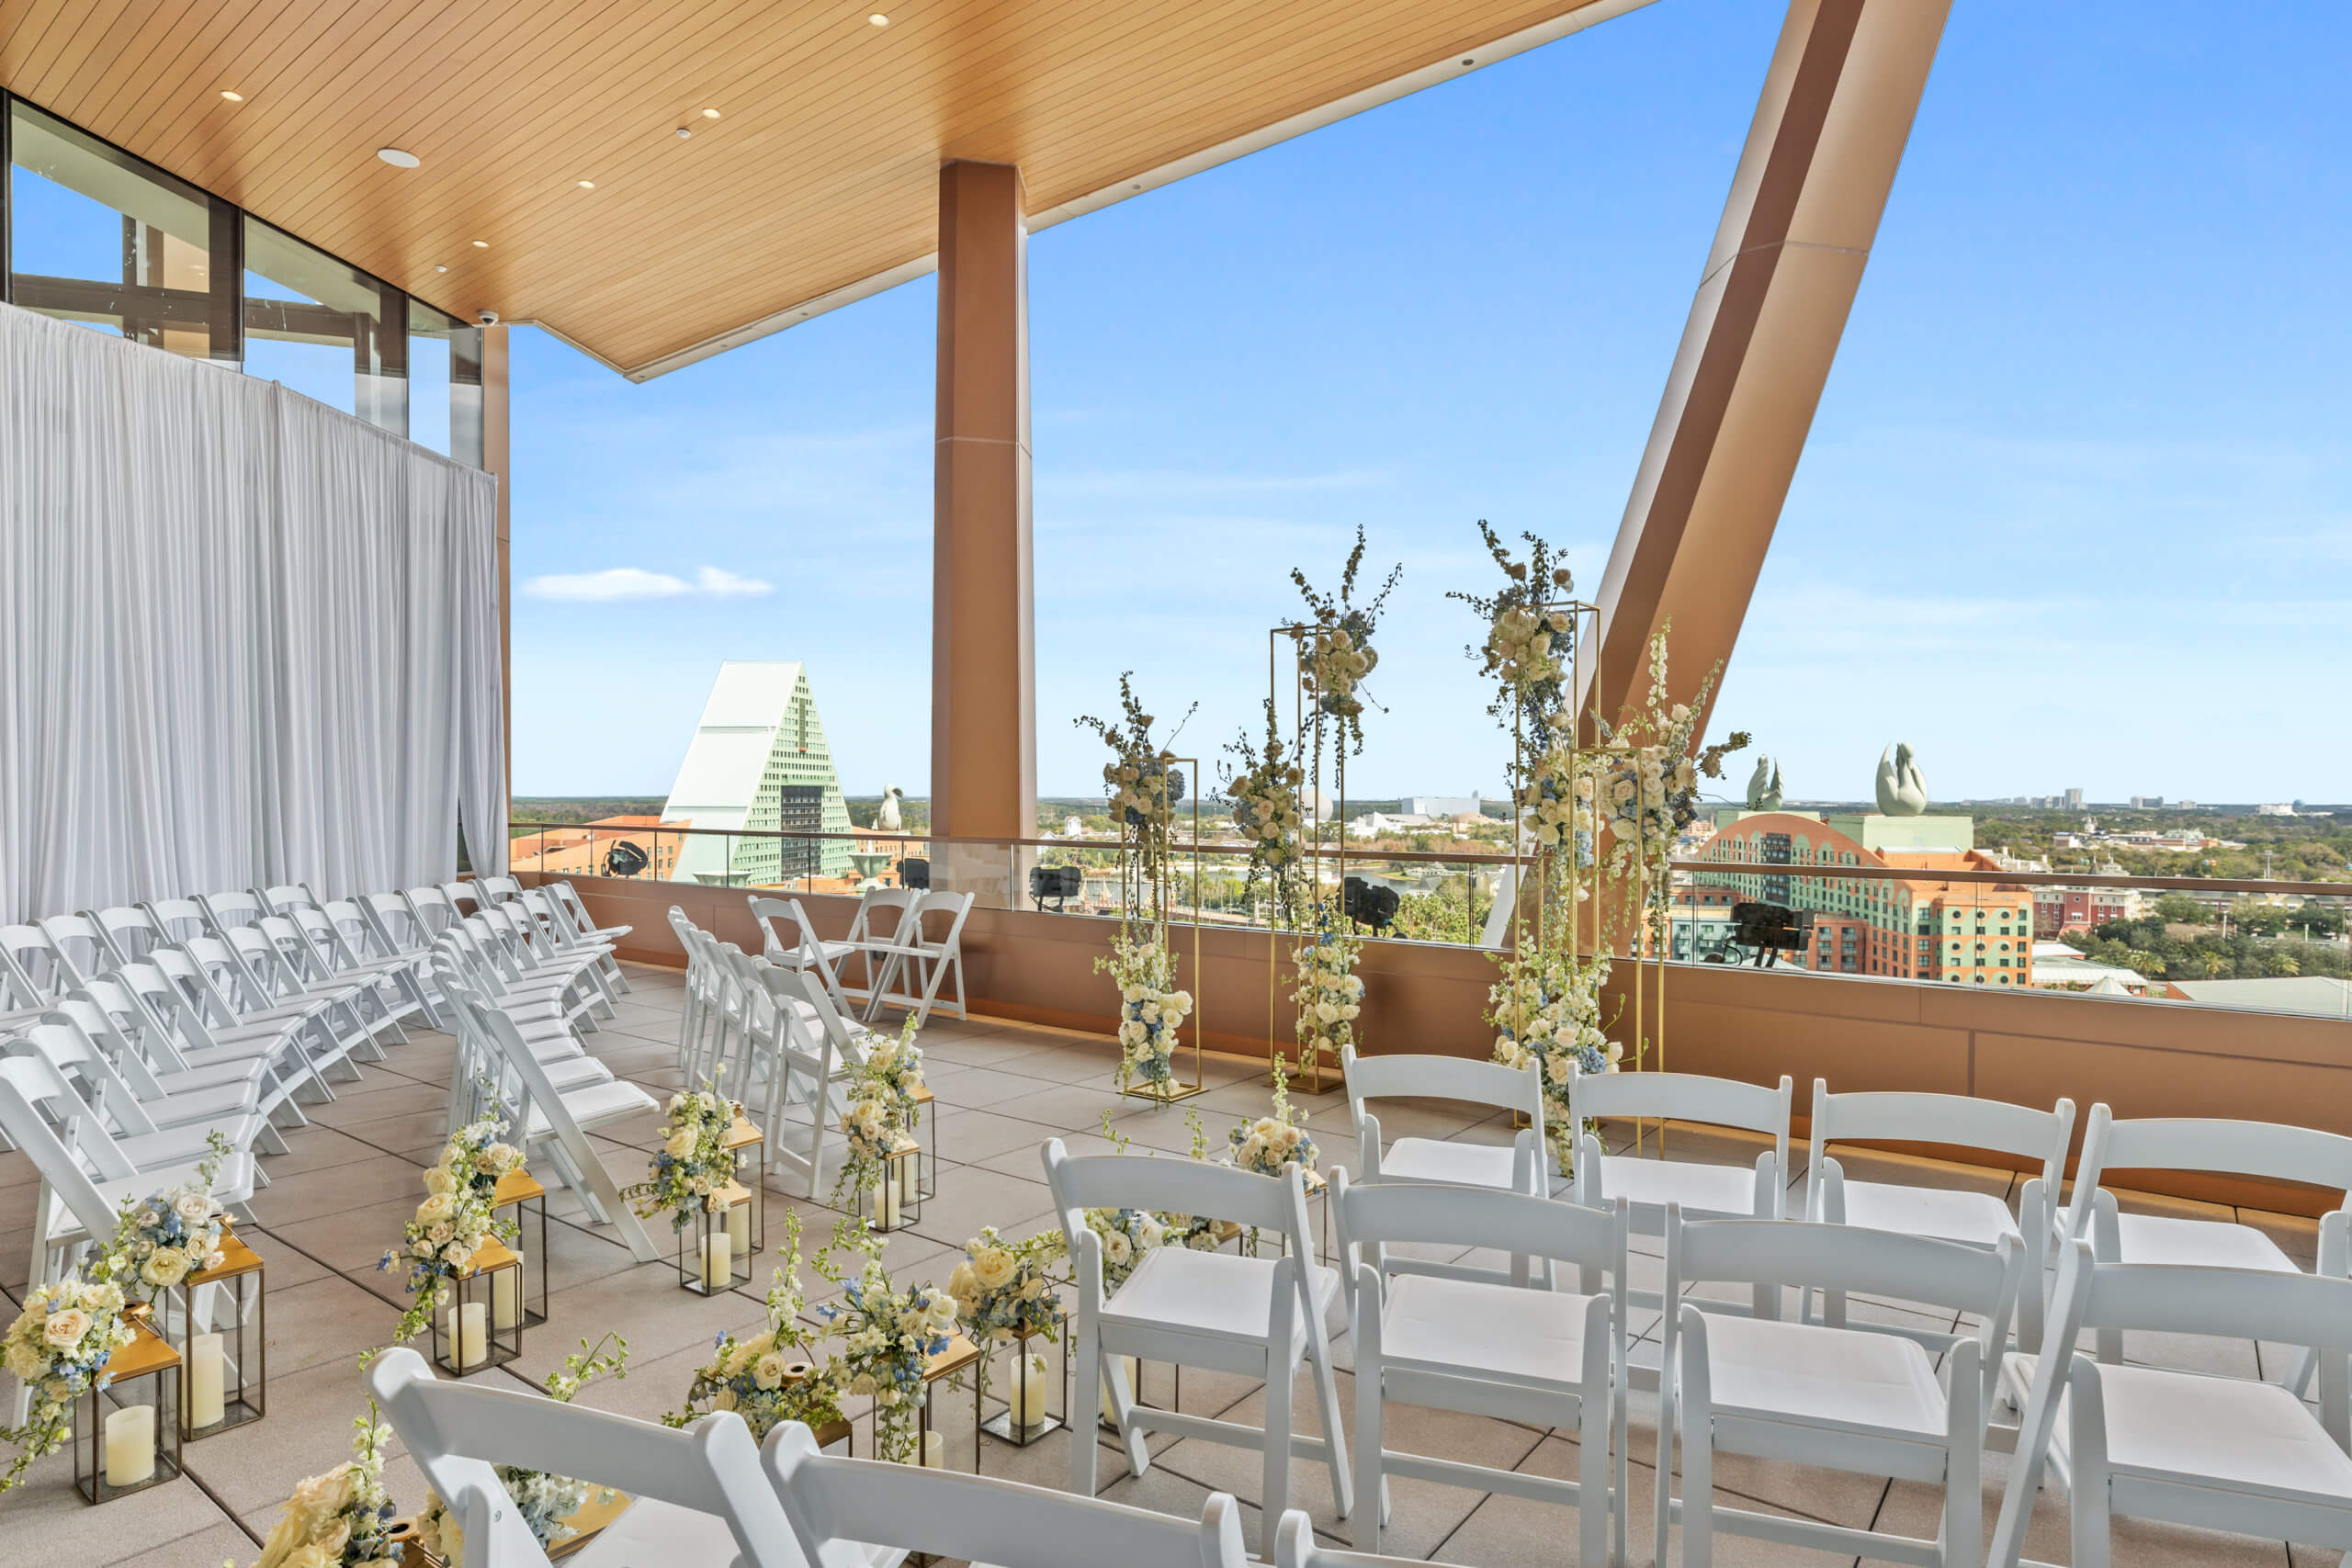 Wedding Ceremony Set-Up at the Vue Terrace on the Rooftop of the Walt Disney World Swan Reserve